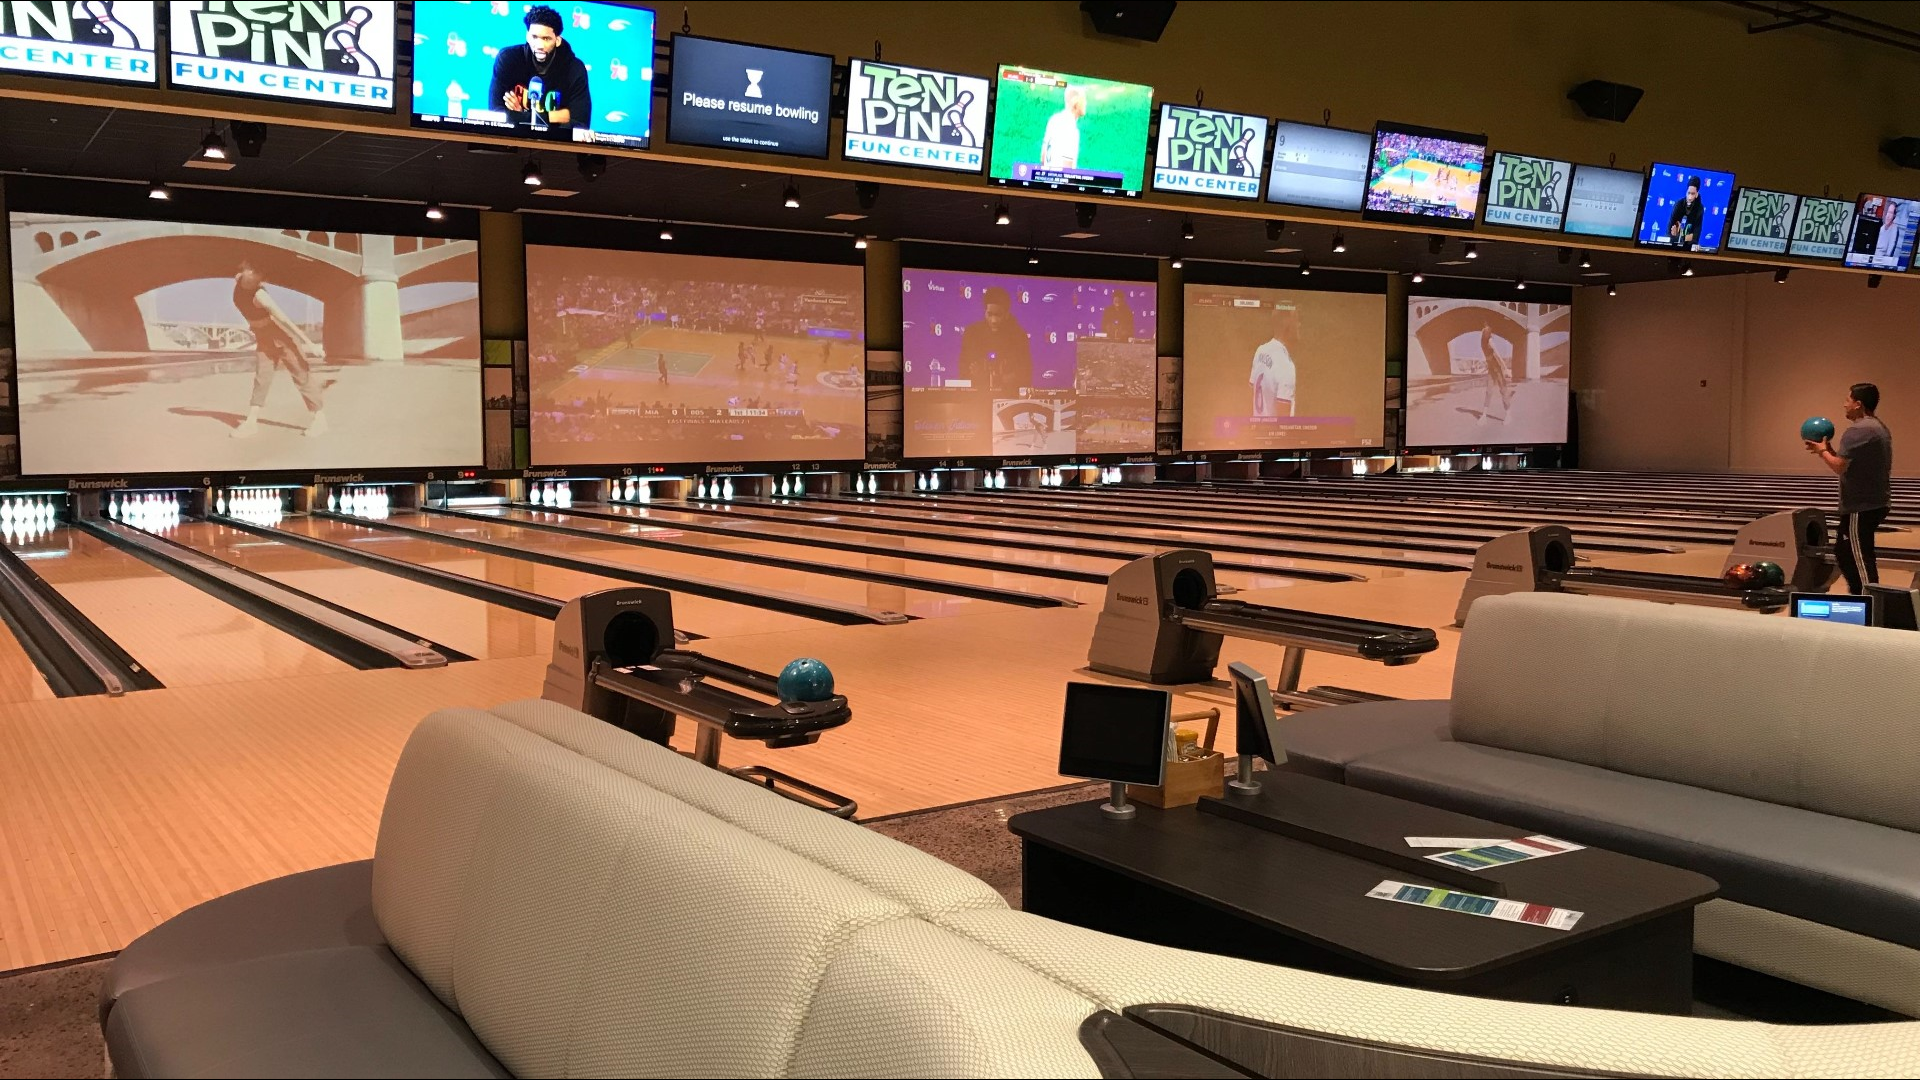 Ten Pin Fun Center has opened in Turlock, CA. It is the first bowling alley in the city in more than 20 years. The new bowling alley features 34 bowling lanes, a bar, arcade and more. Lena Howland talks with the General Manager about what you can expect.